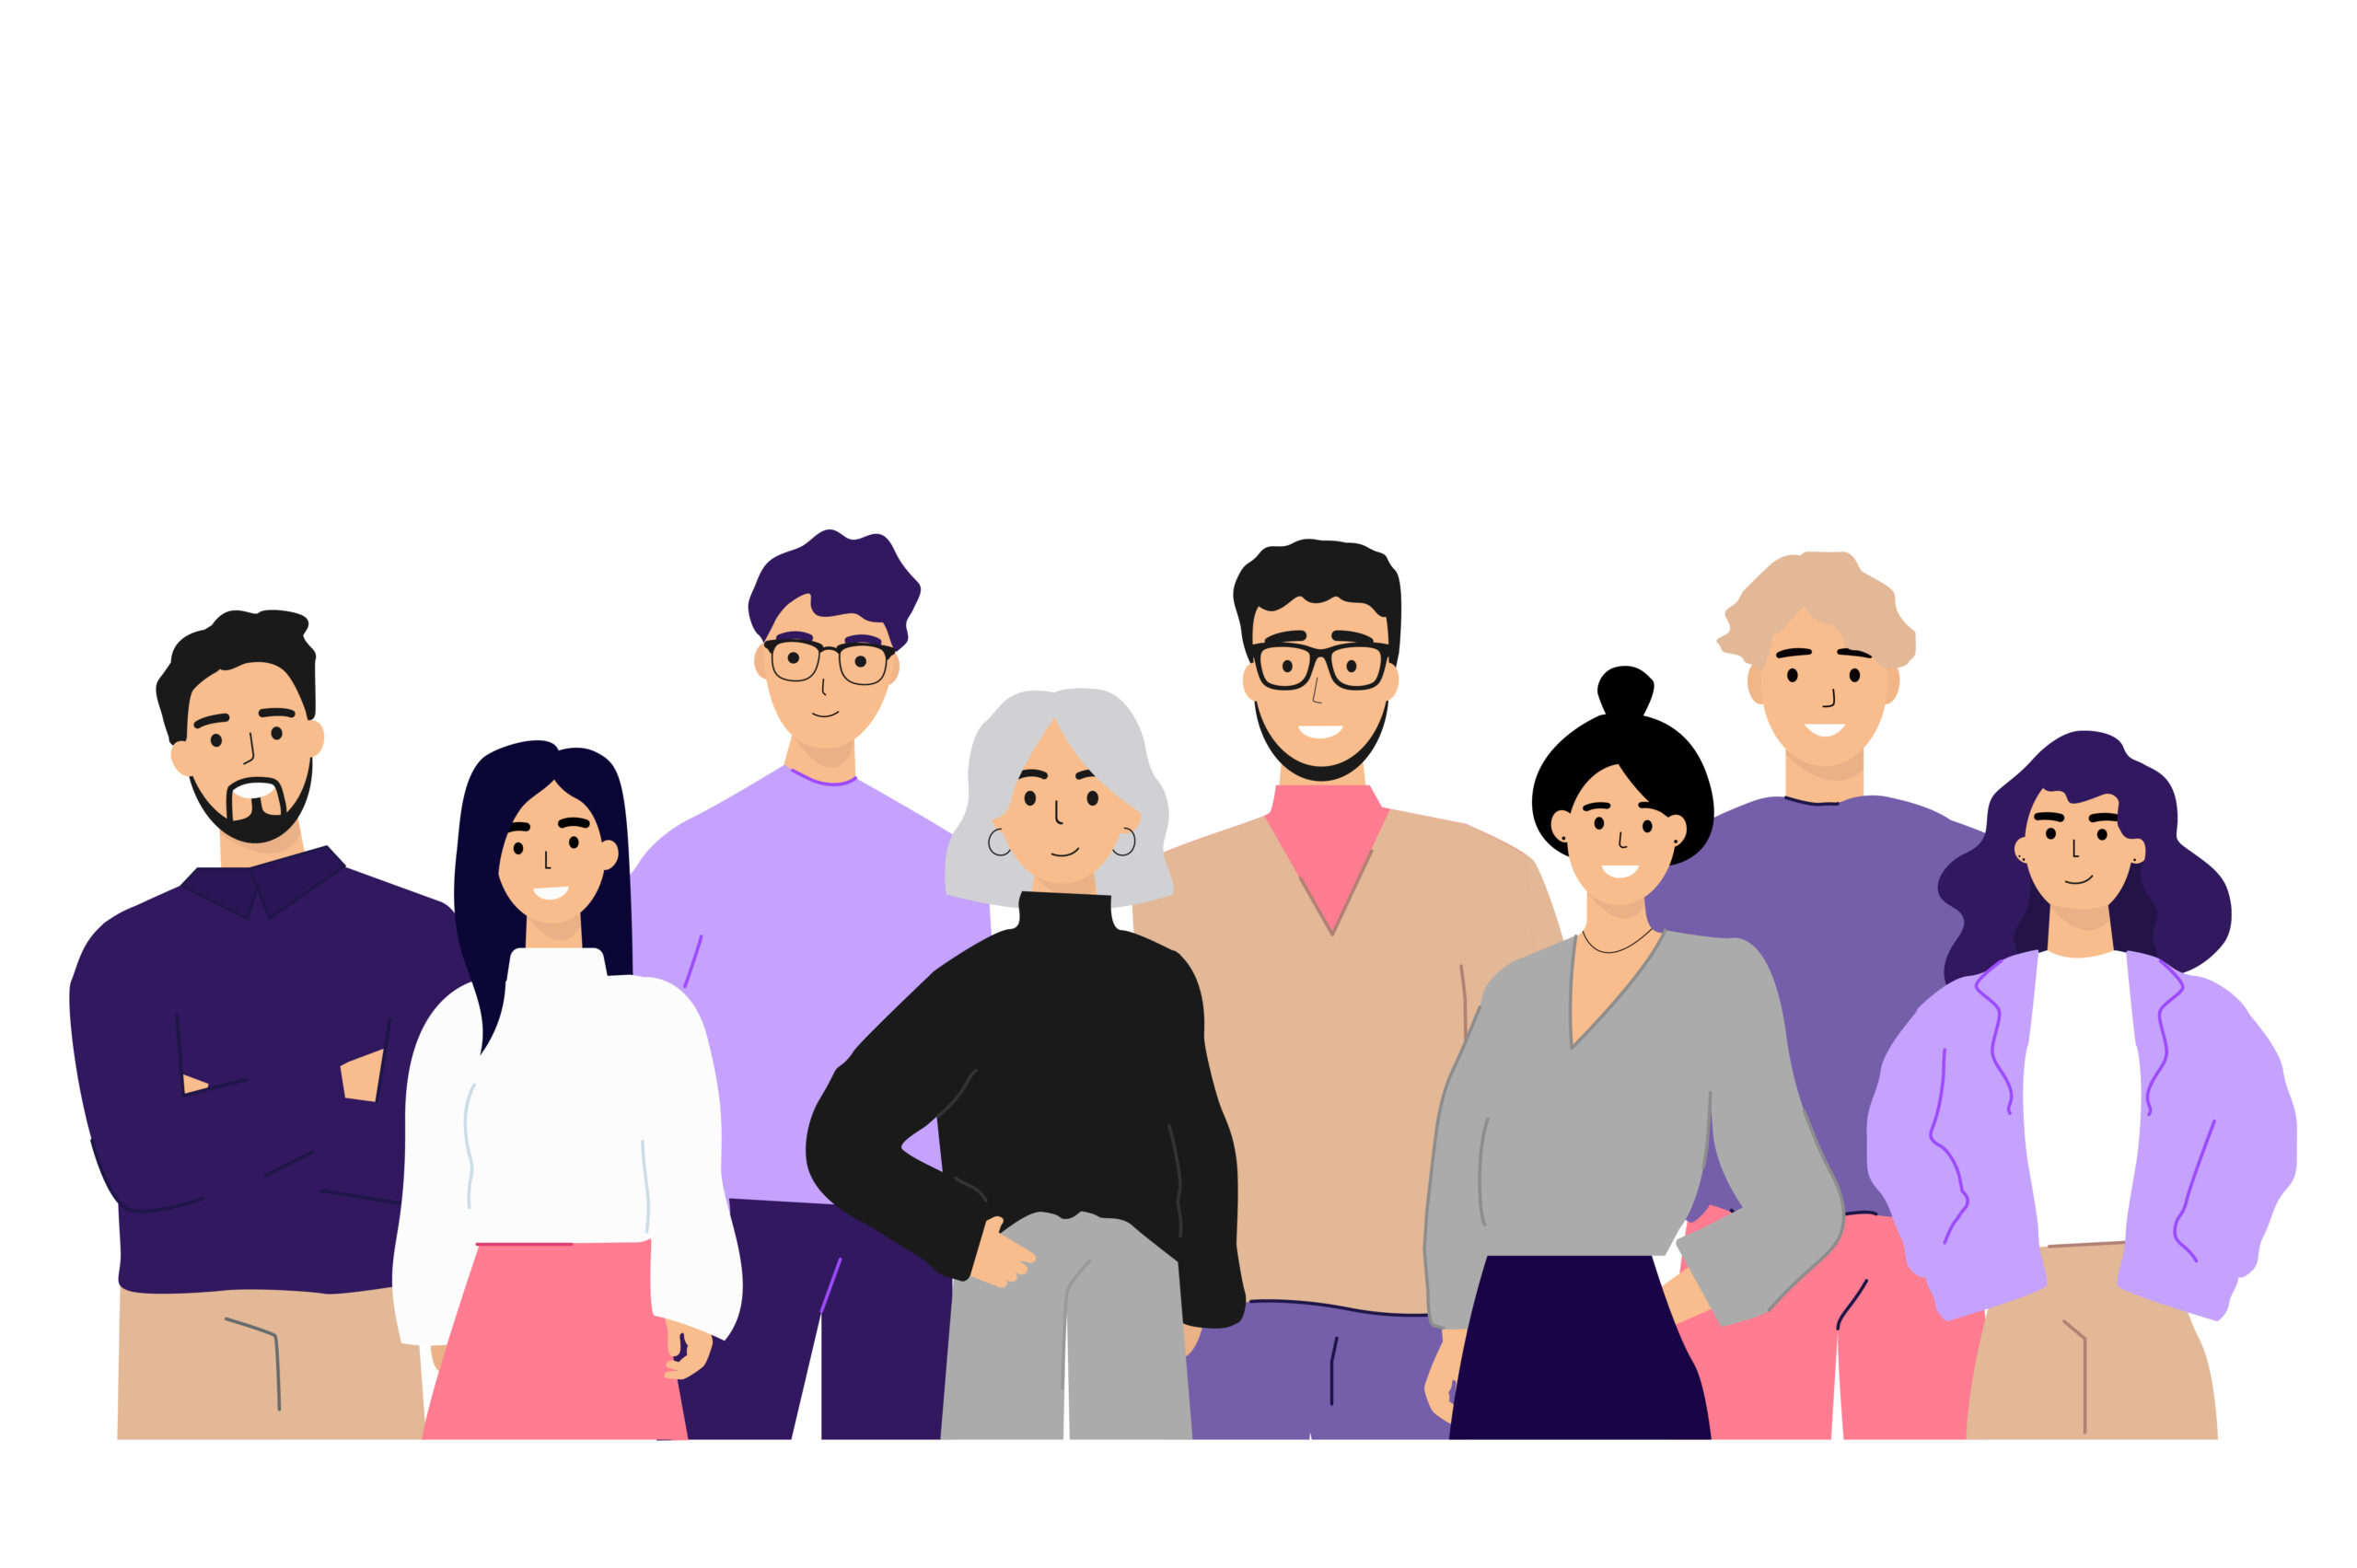 Corporate portrait of office workers and employees flat vector illustration. Cartoon happy business team, colleagues standing together. Staff and professionals concept